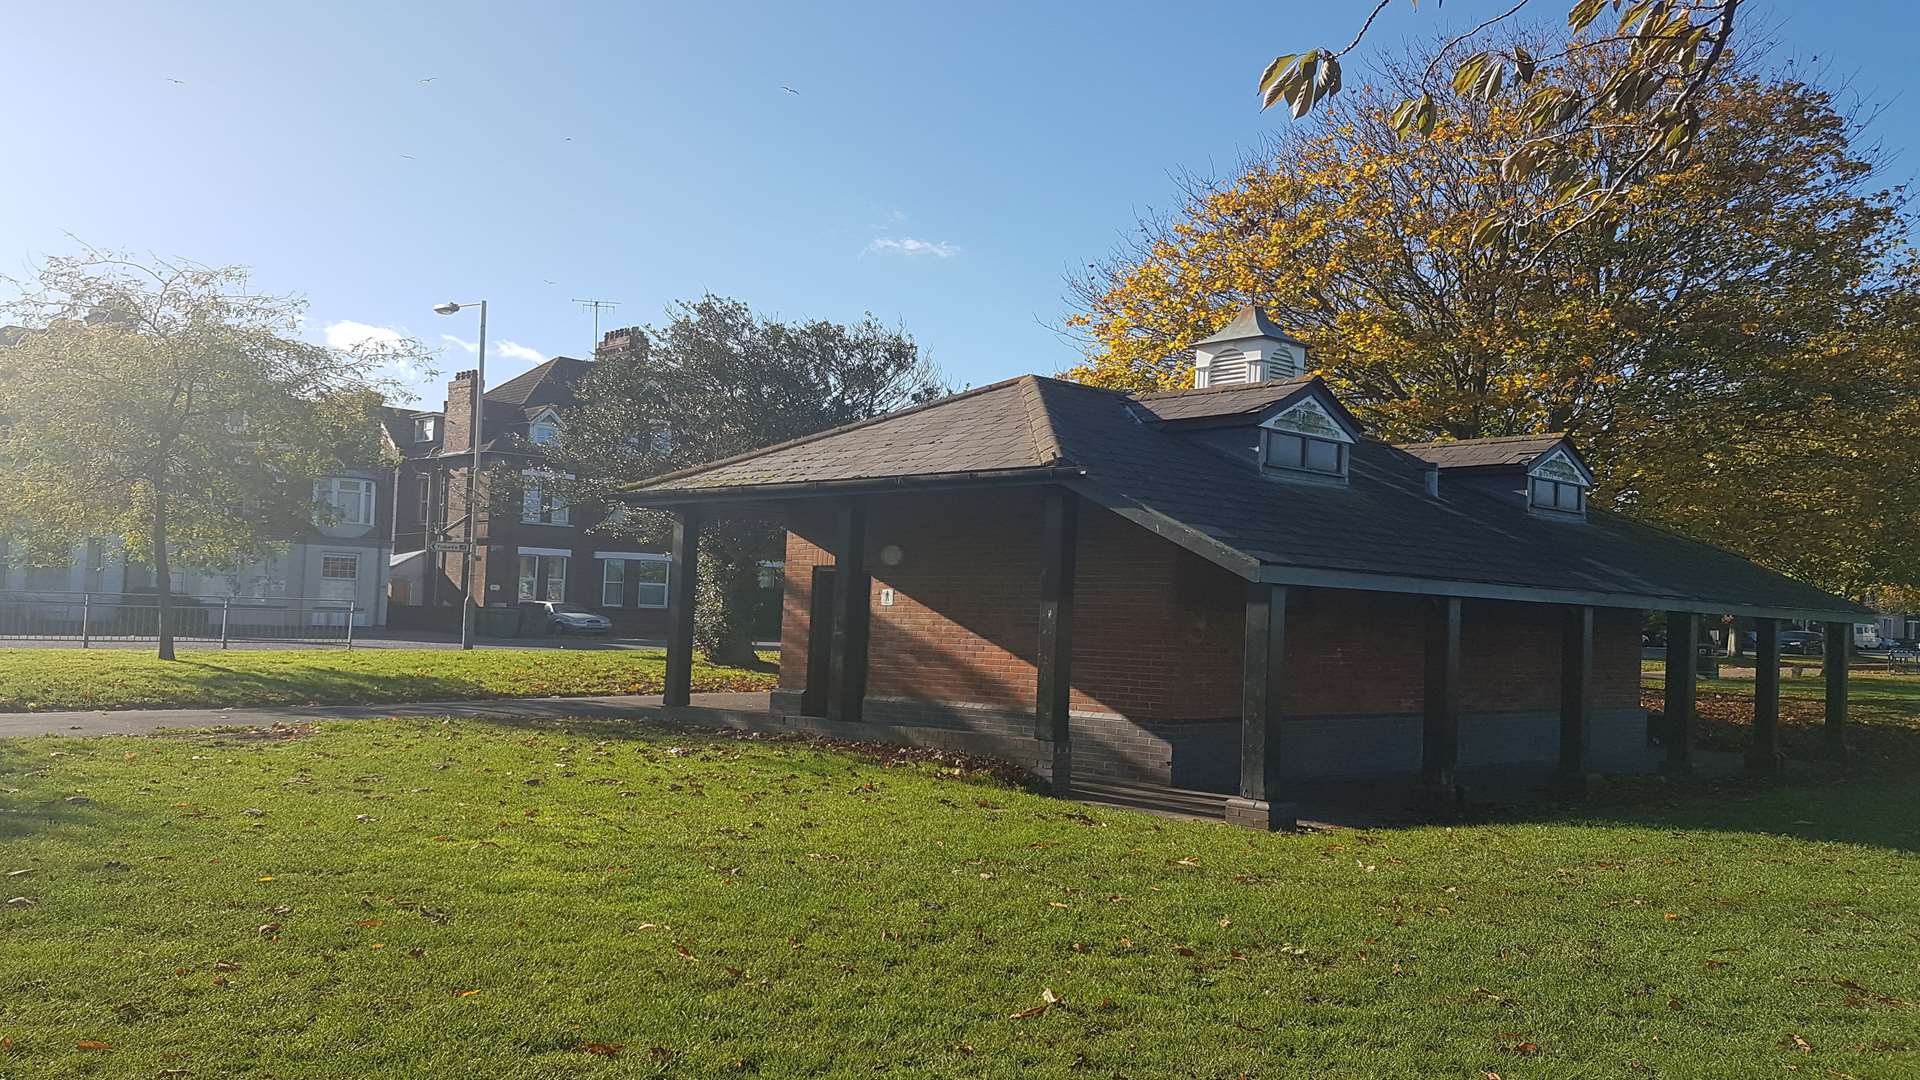 Radnor Park public toilets following reports of suspected drug taking